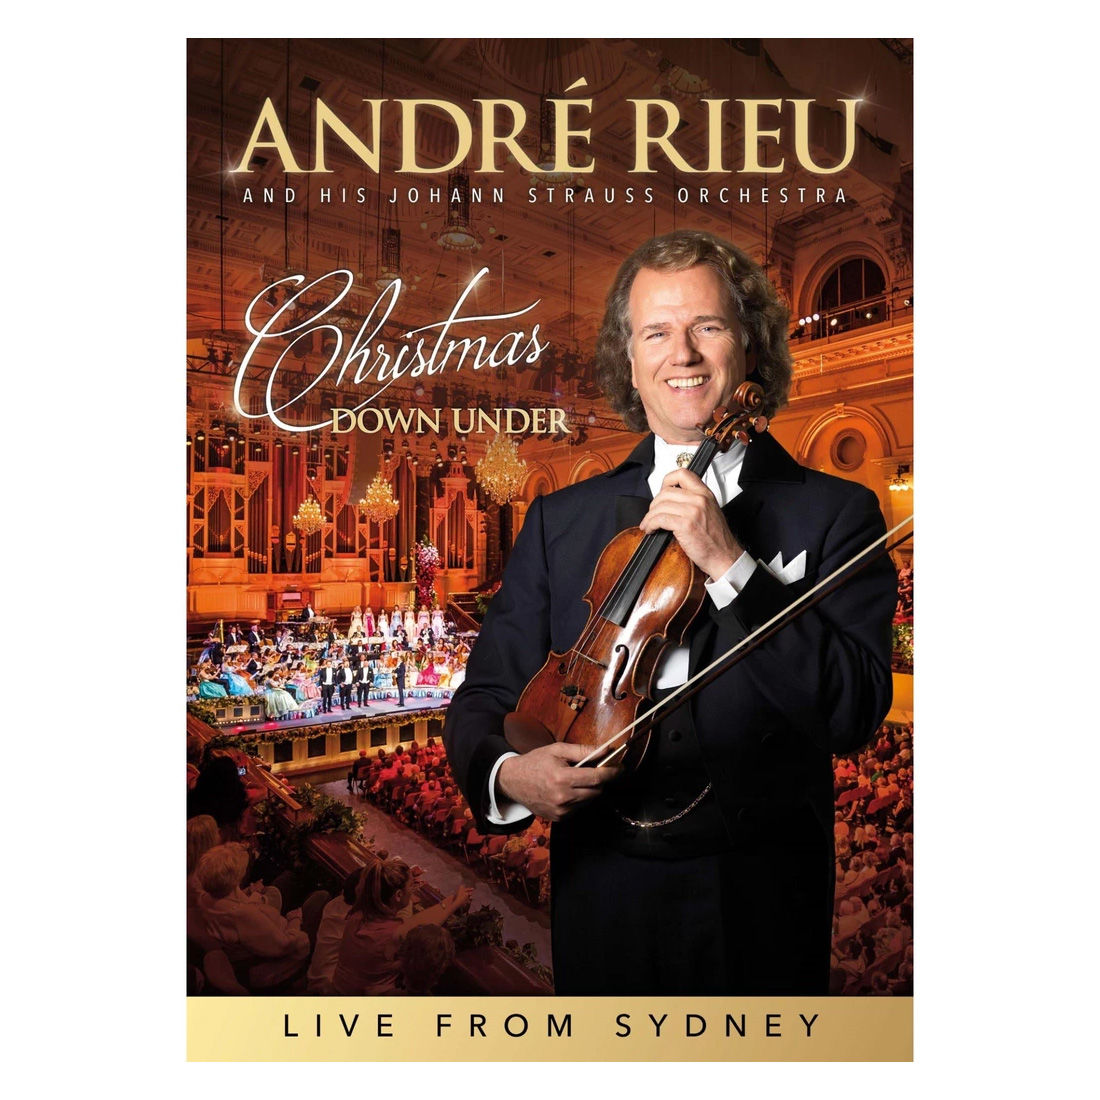 André Rieu - Christmas Down Under - Live from Sydney: DVD